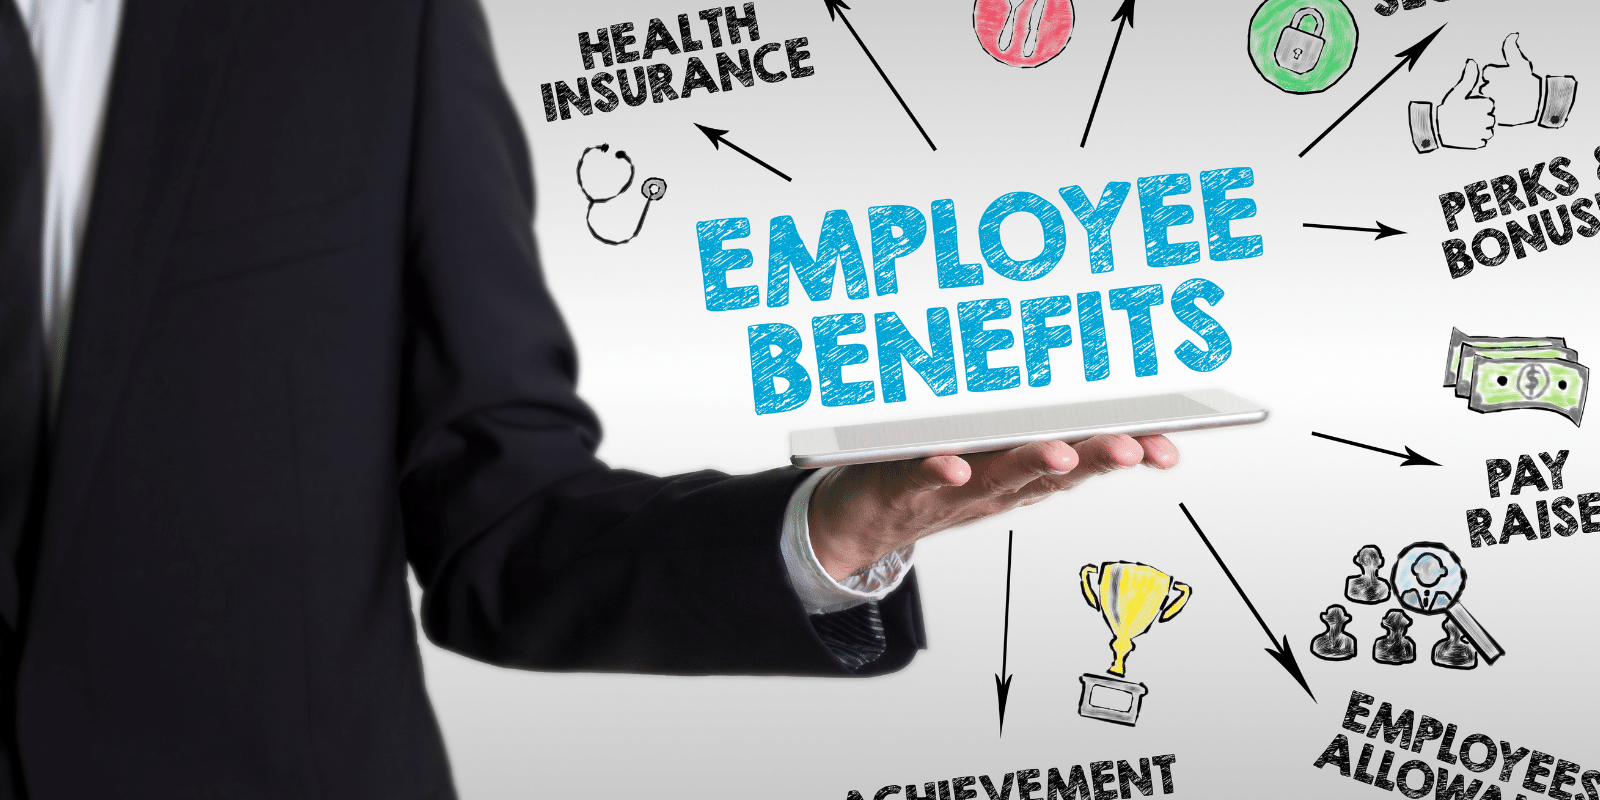 Today’s Employee Benefits Have to Go Beyond Health and Pension